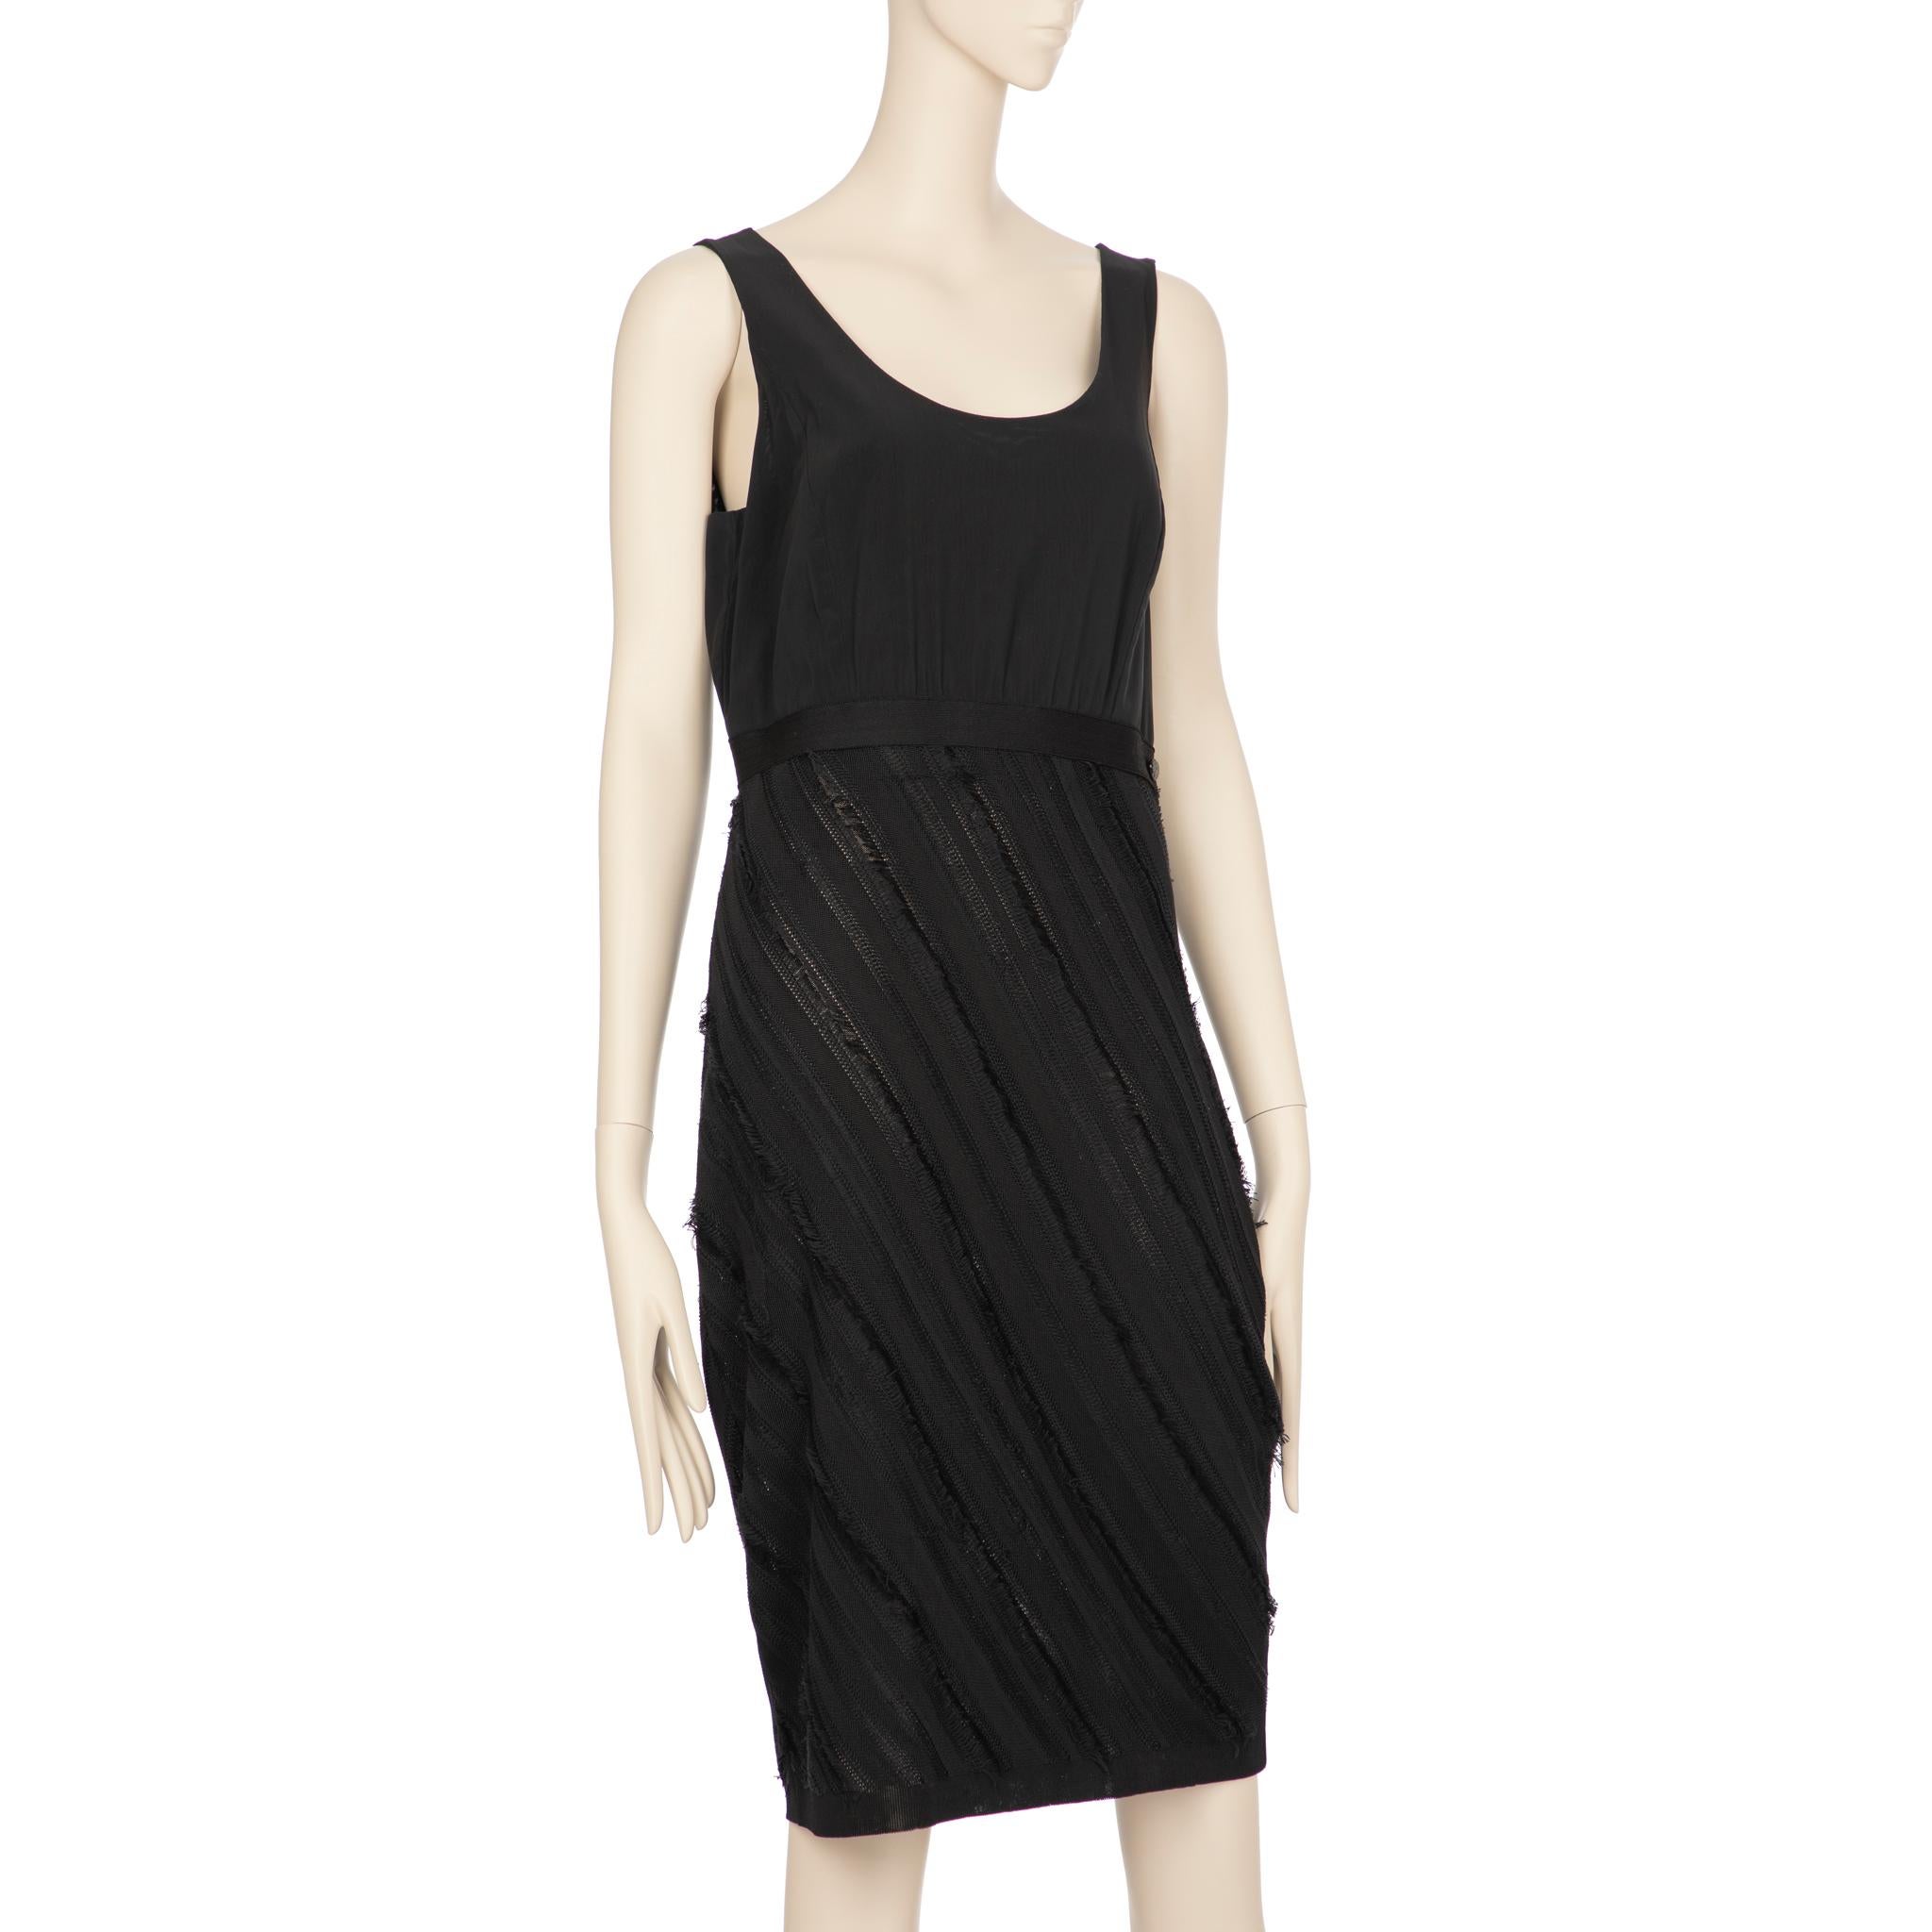 
Brand:

Chanel
Product:

Shift Dress
Size:

42 Fr

Colour:

Black

Material:

Outer: 56% Viscose & 44% Silk

Lining: 73% Polyester & 27% Elastane

Condition:

Excellent:

The product is in excellent condition, displaying minimal signs of wear. The